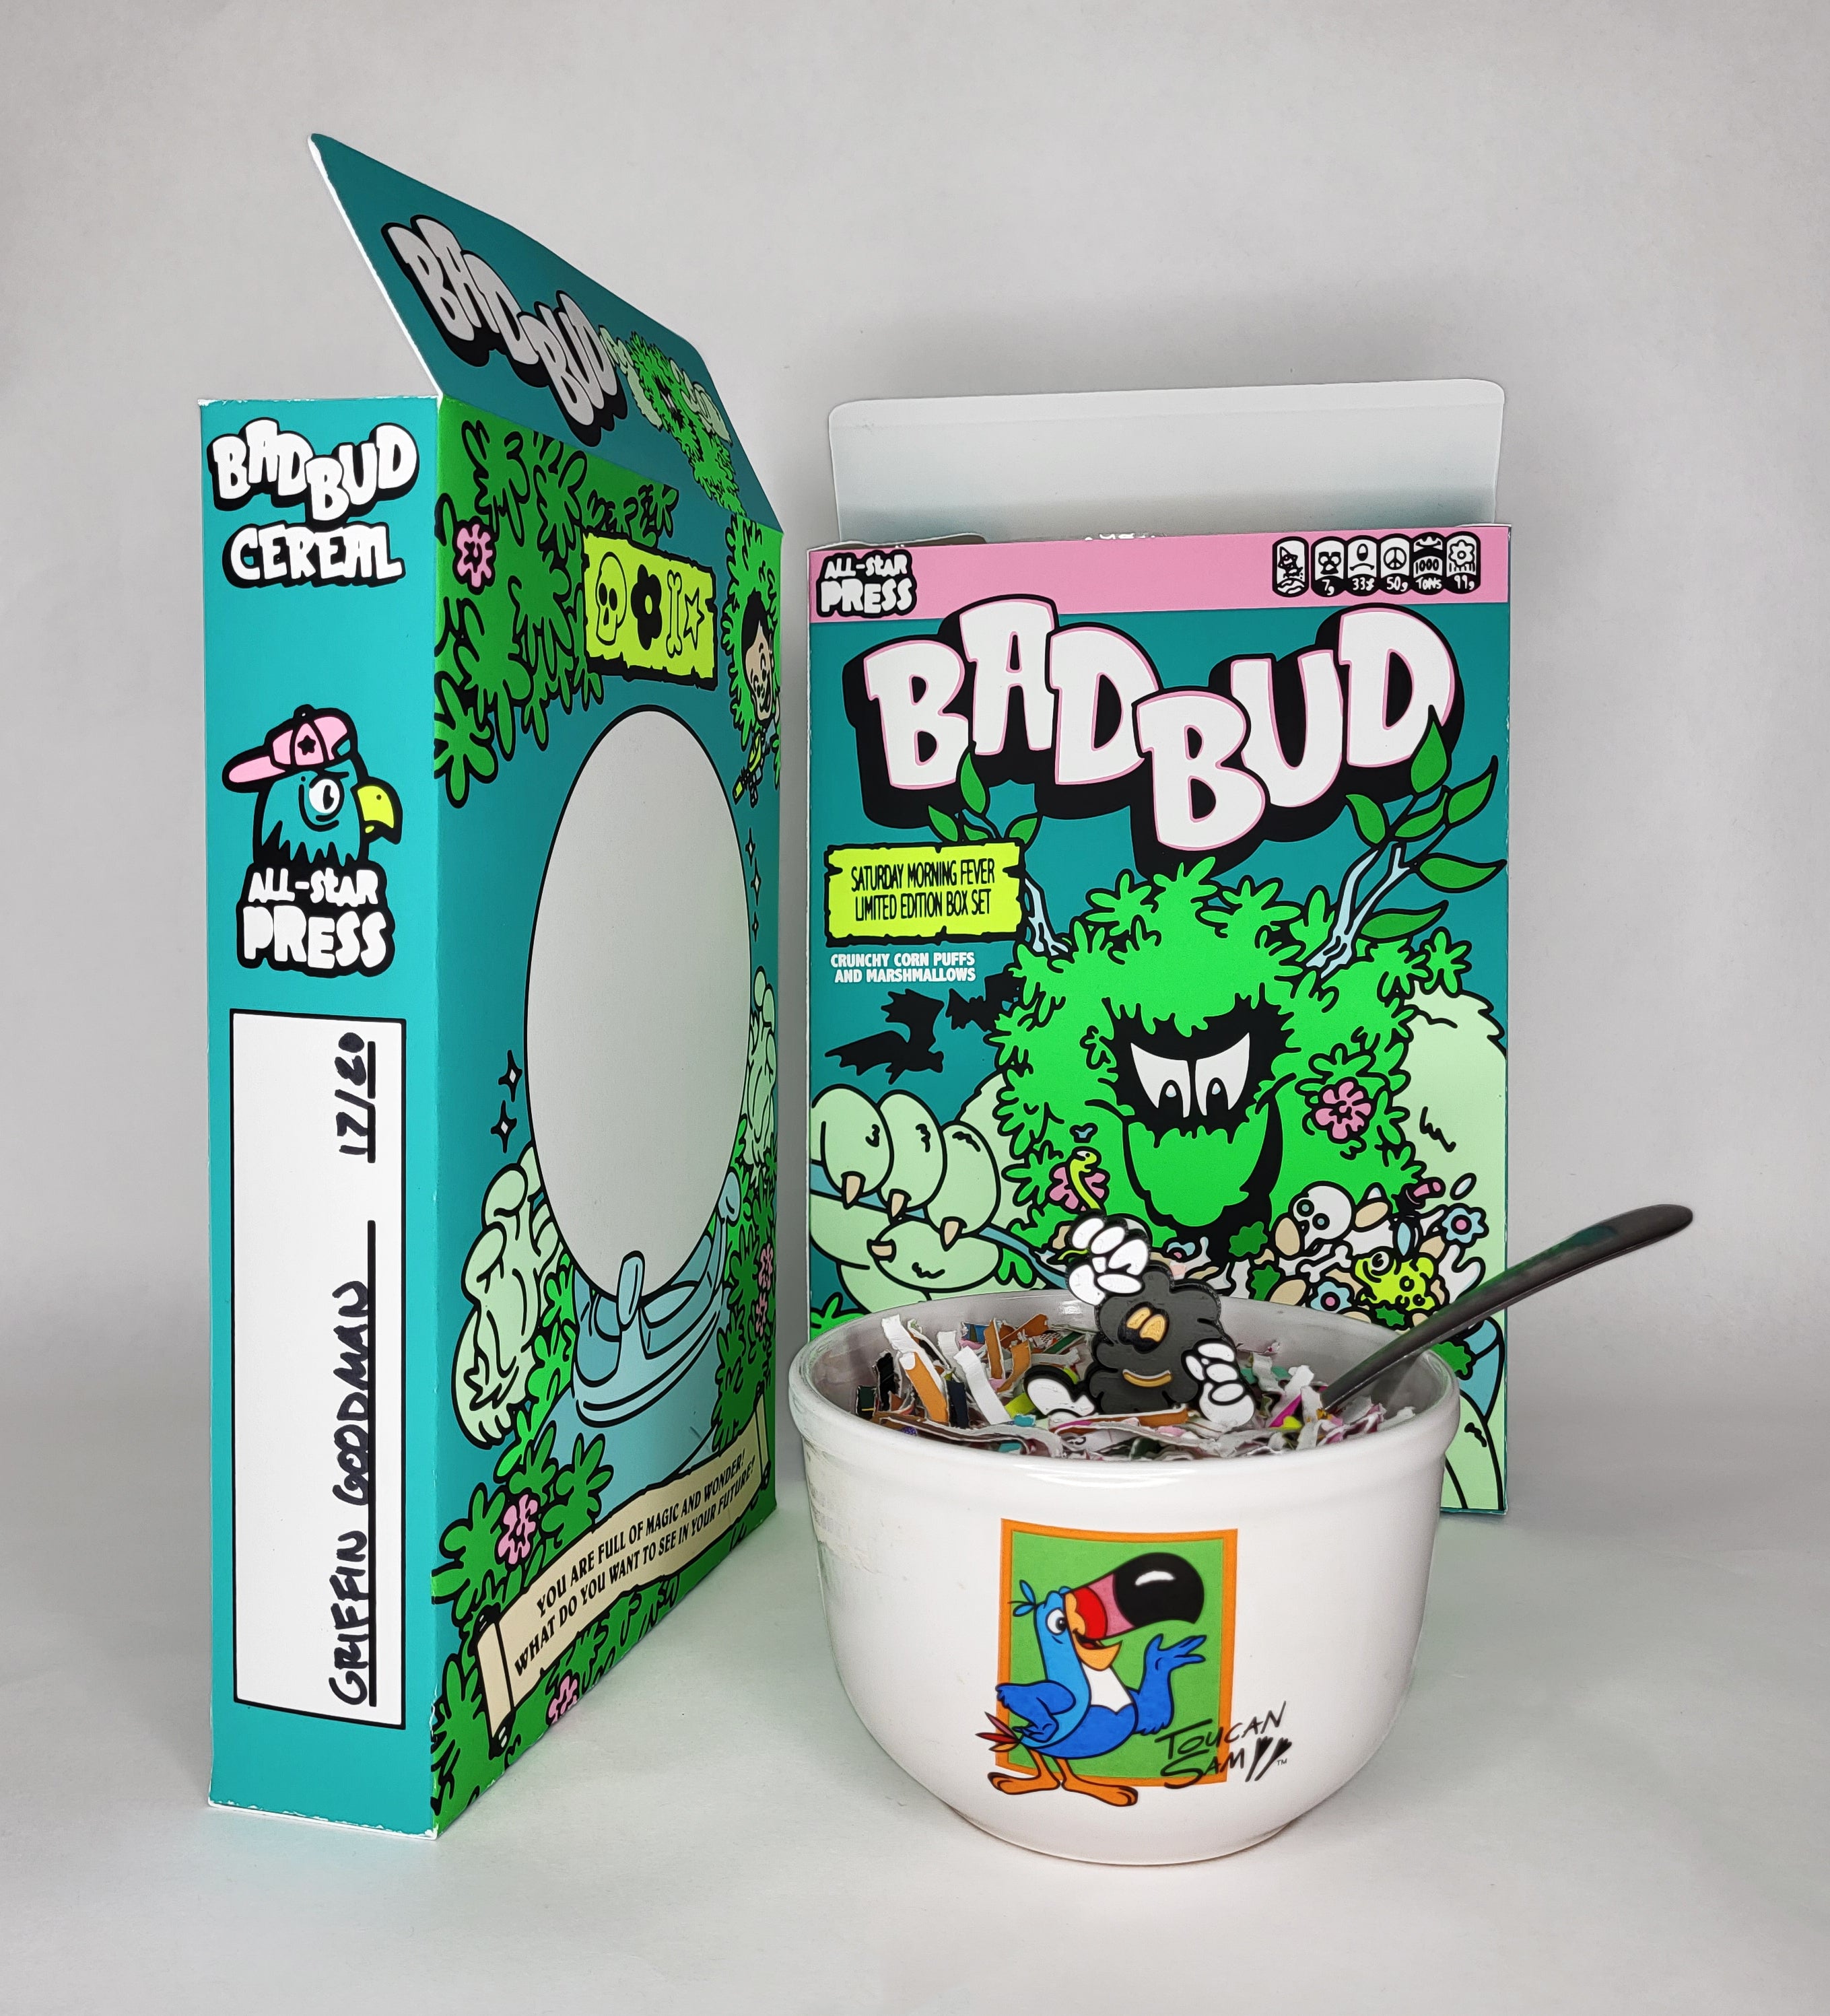 "Bad Bud Cereal Box Print" by Griffin Goodman